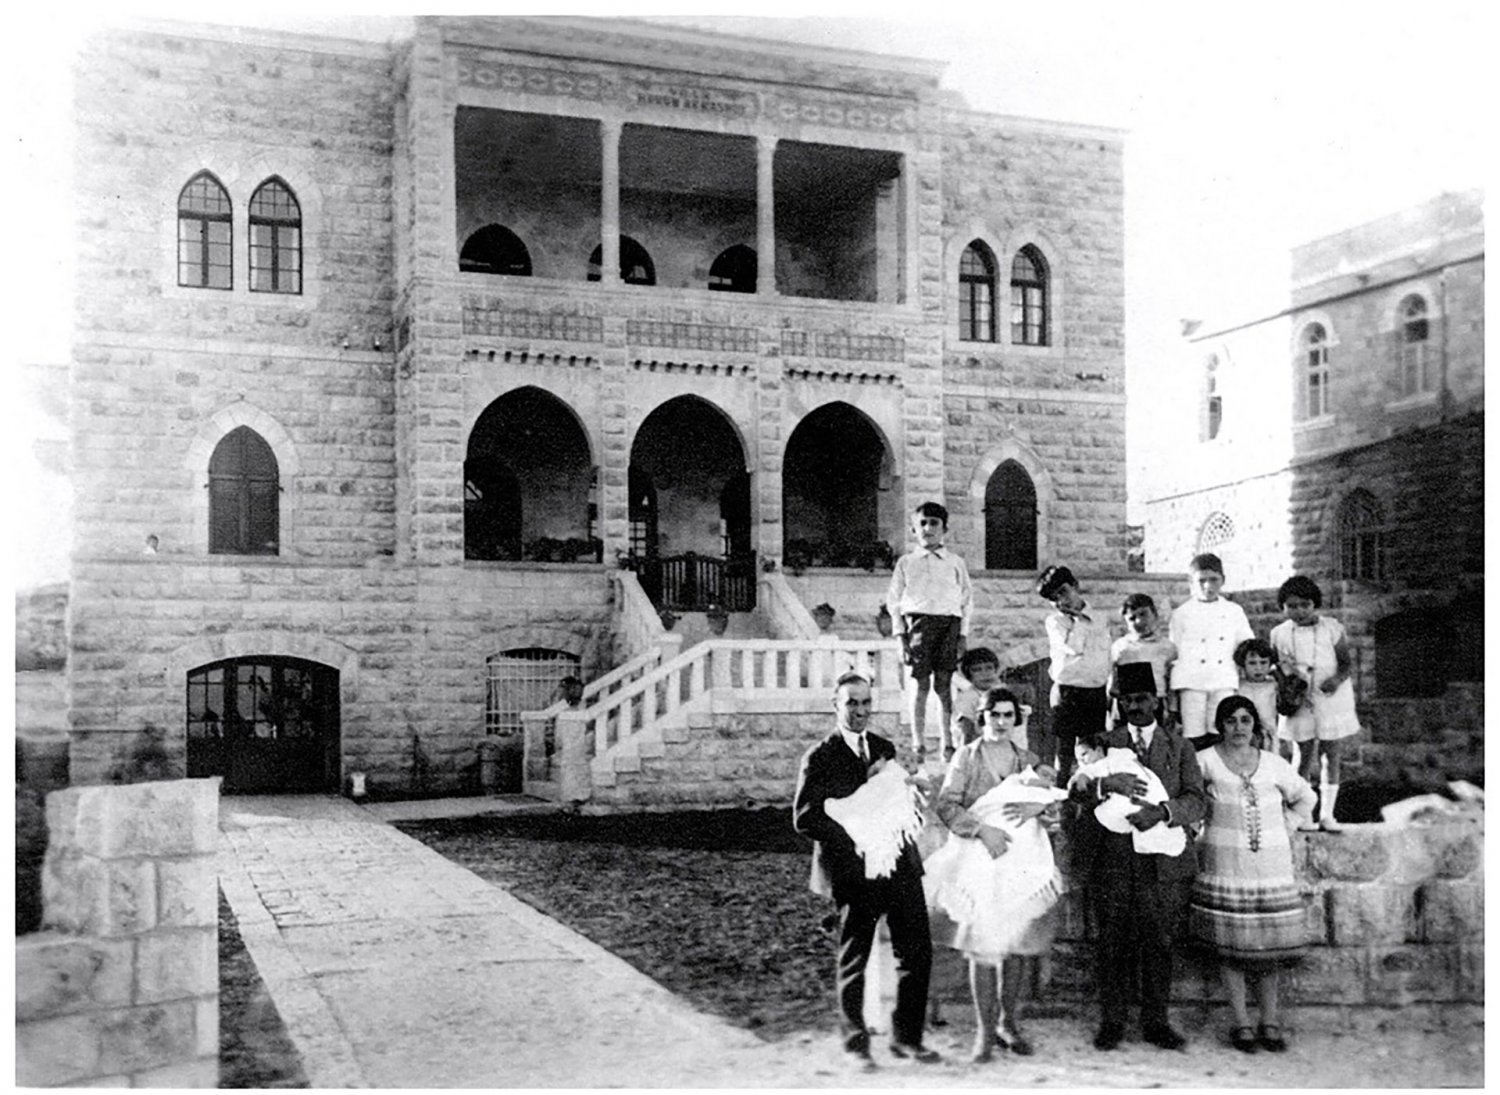 Hanna and Mathilde Bisharat and family in front of their Jerusalem home, Villa Harun al-Rashid, ca. 1929